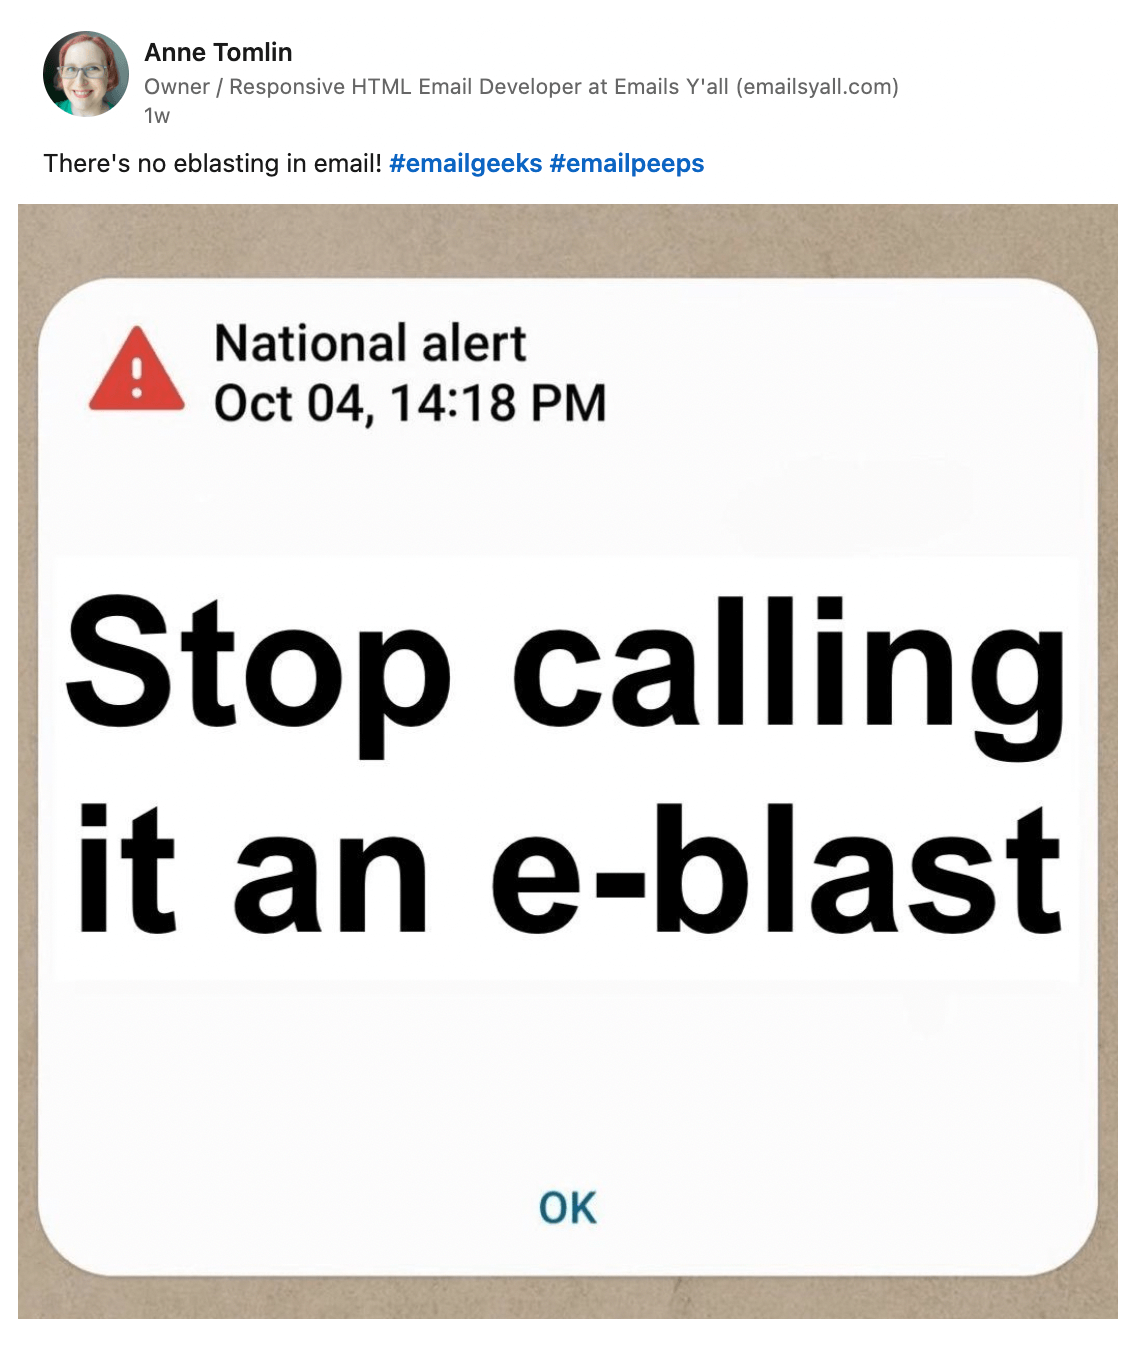 Anne Tomlin on LinkedIn says 'There's no eblasting in email! #emailgeeks #emailpeeps' and the image is the national alert that went out on October 4, 2023 at 14:18 PM with the words 'Stop calling it an e-blast'